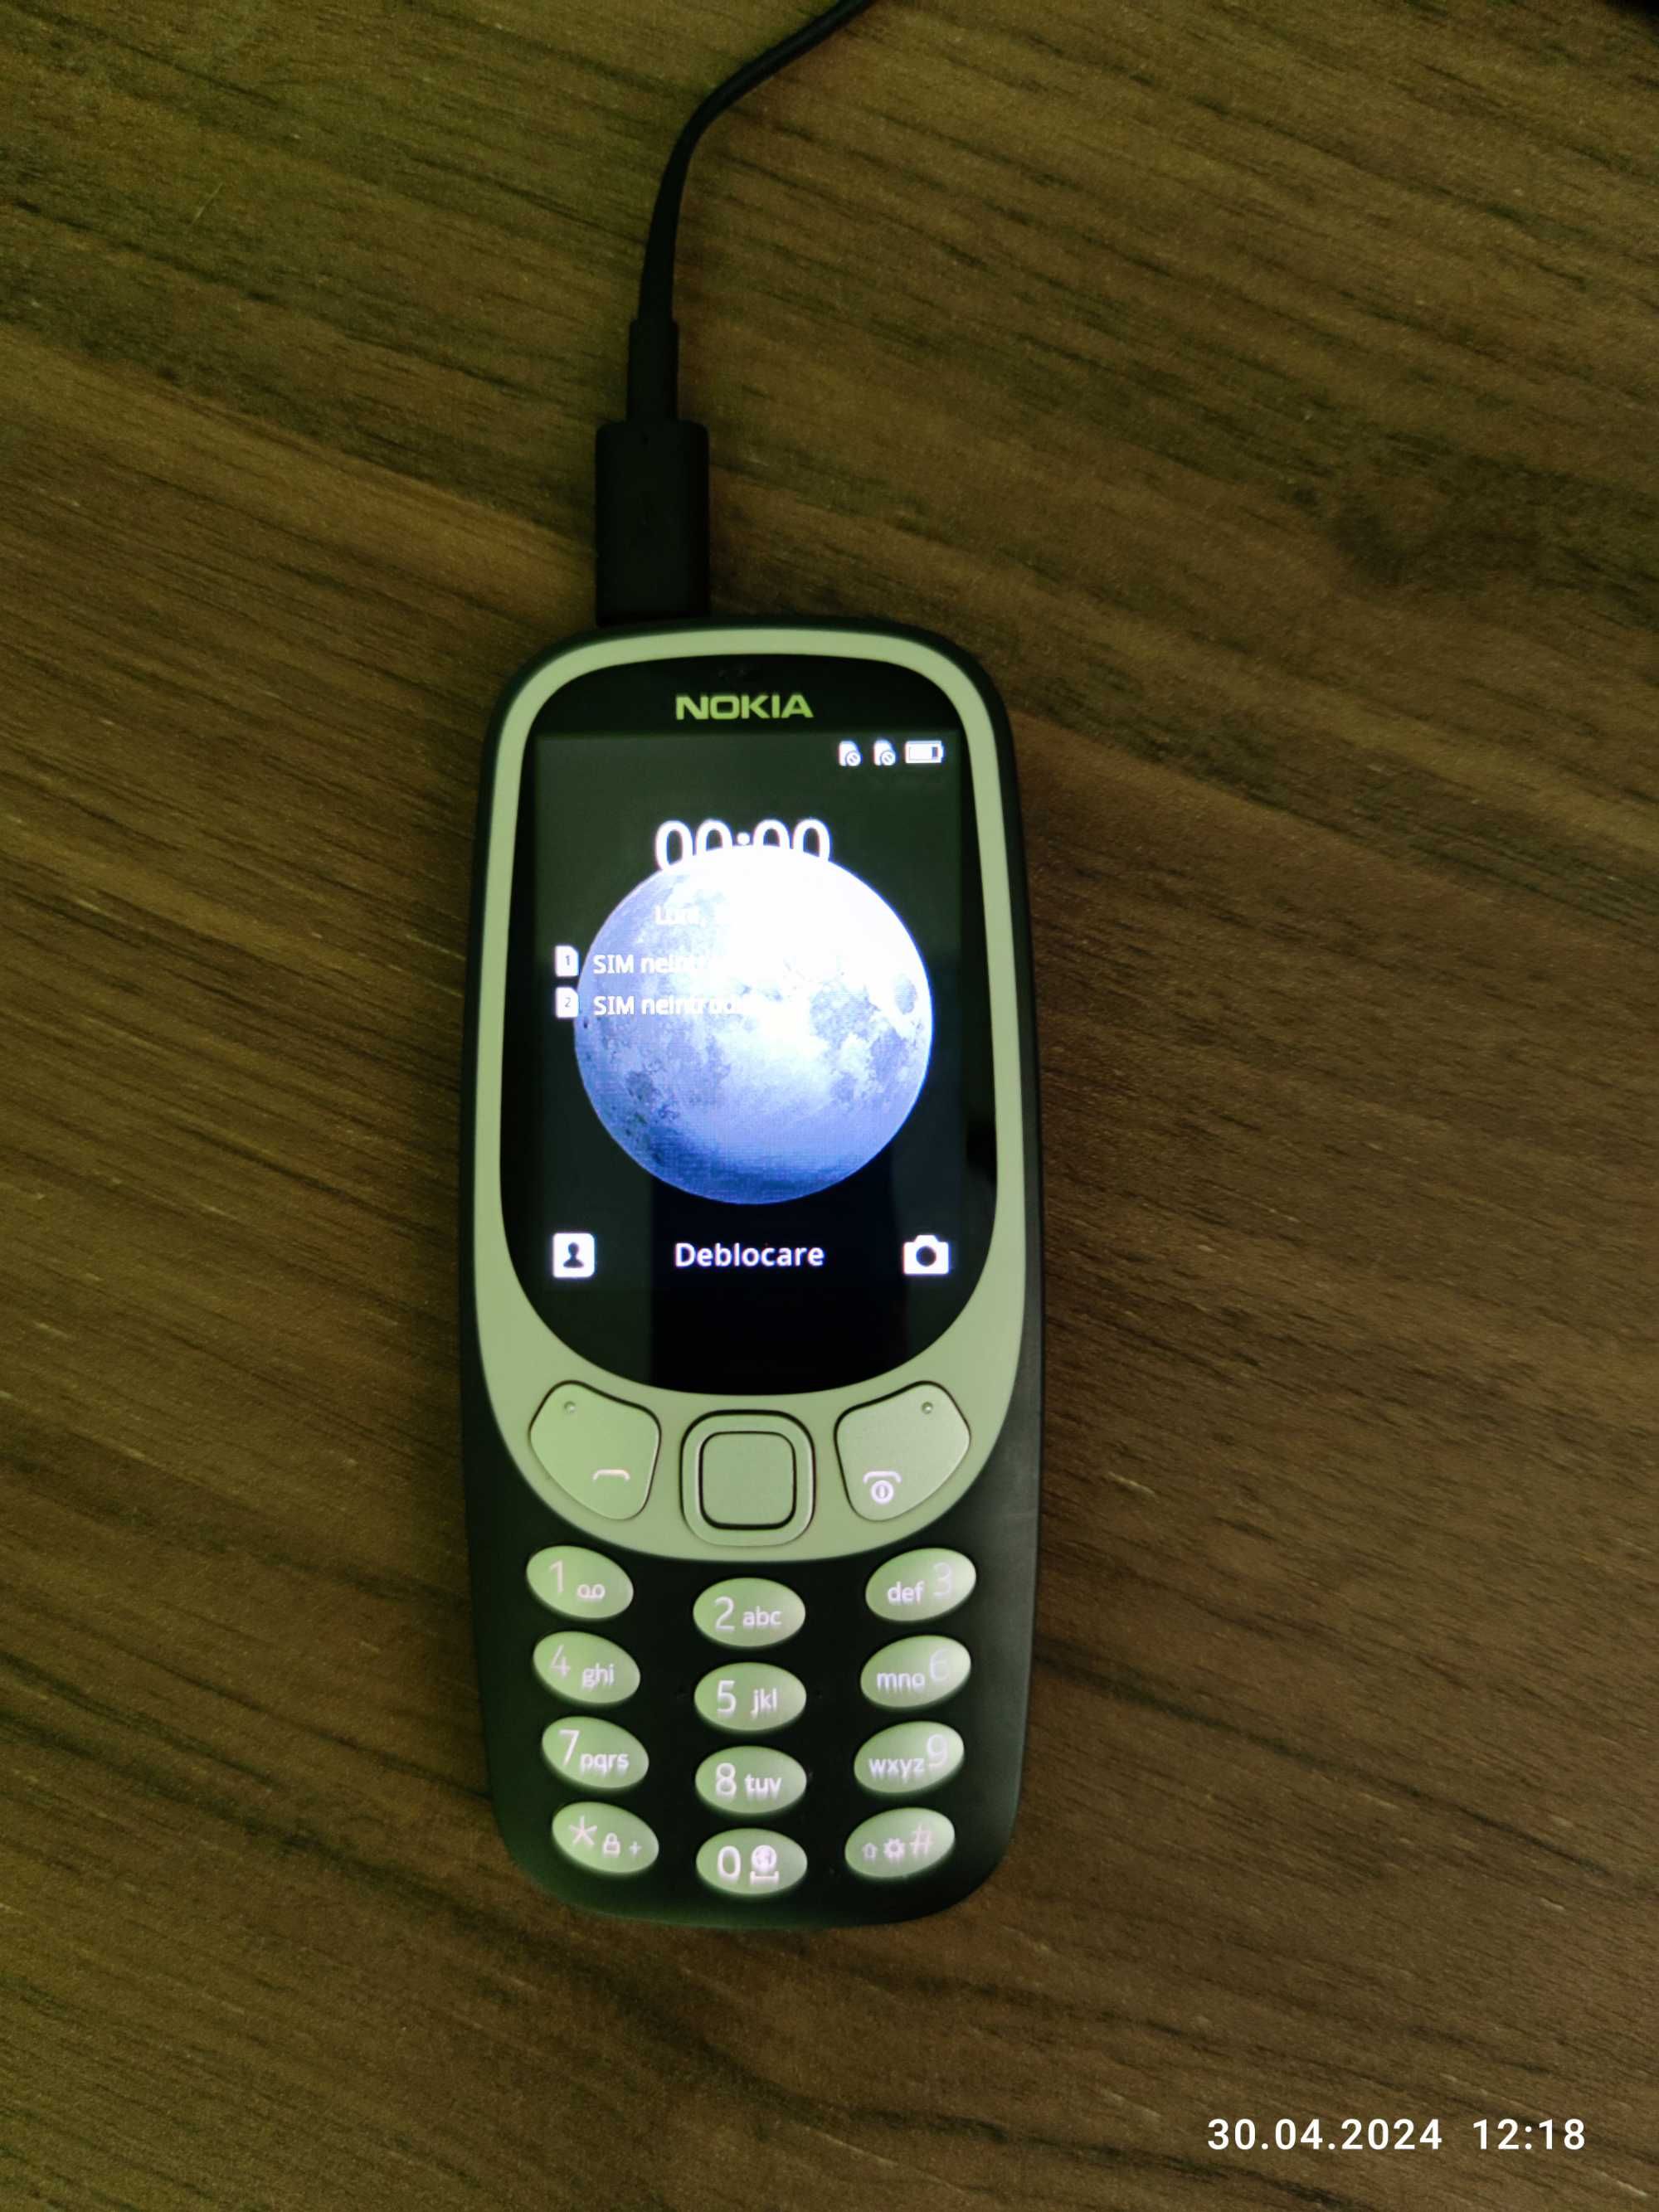 Nokia 3310 perfect functional